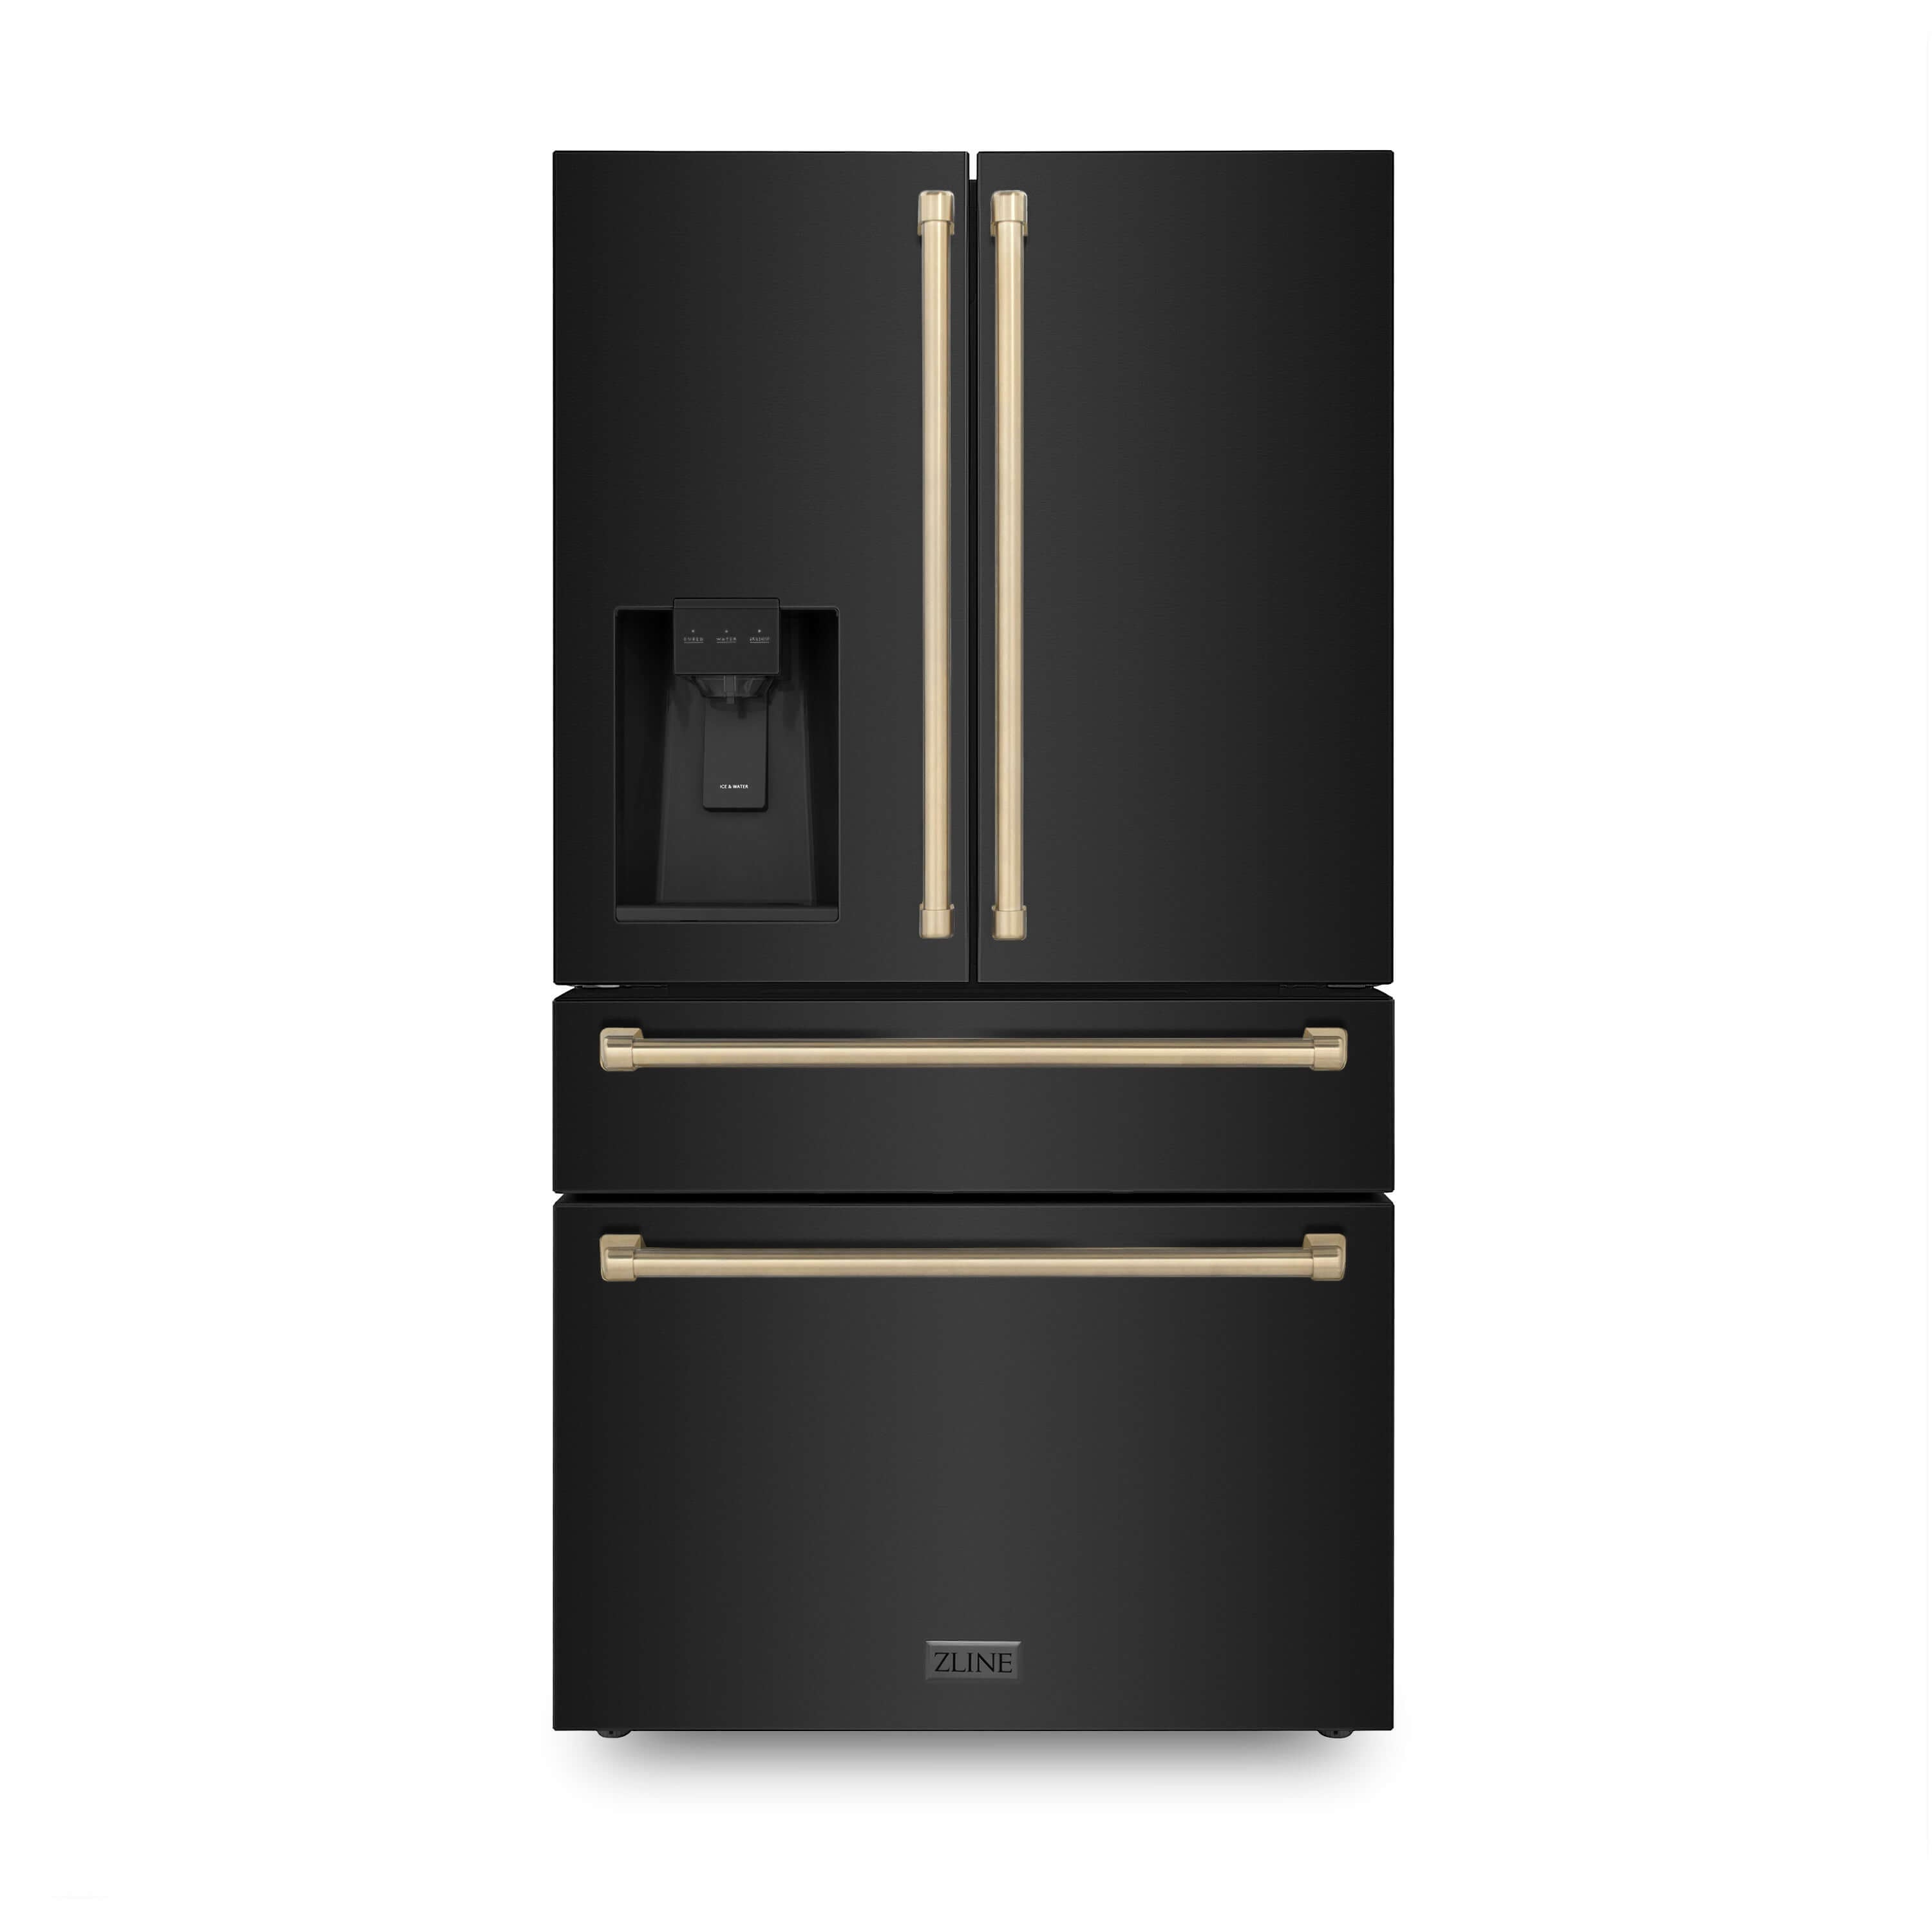 ZLINE 36 in. Autograph Edition 22.5 cu. ft Freestanding French Door Refrigerator with Ice Maker in Fingerprint Resistant Black Stainless Steel with Accents (RFMZ-36-BS) included in package.